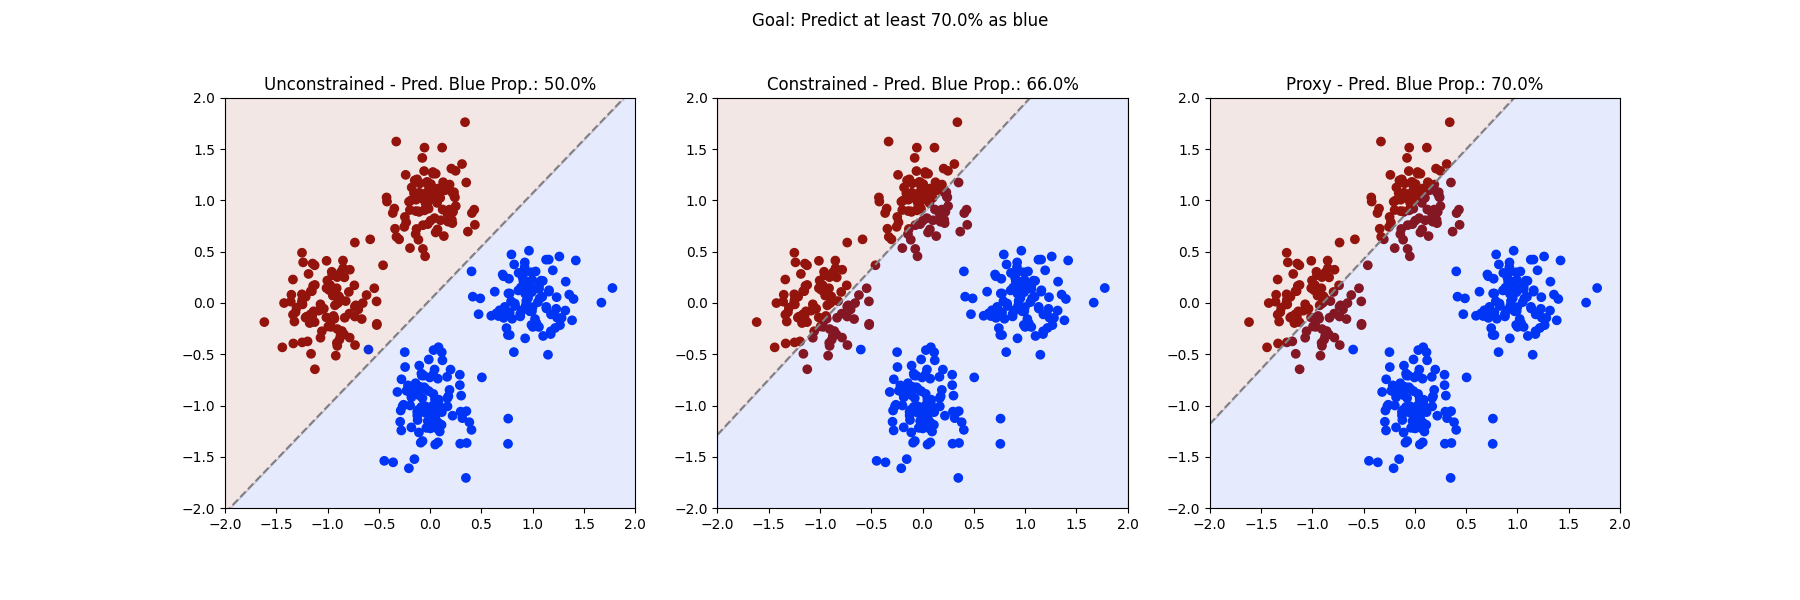 Goal: Predict at least 70.0% as blue, Unconstrained - Pred. Blue Prop.: 50.0%, Constrained - Pred. Blue Prop.: 66.0%, Proxy - Pred. Blue Prop.: 70.0%